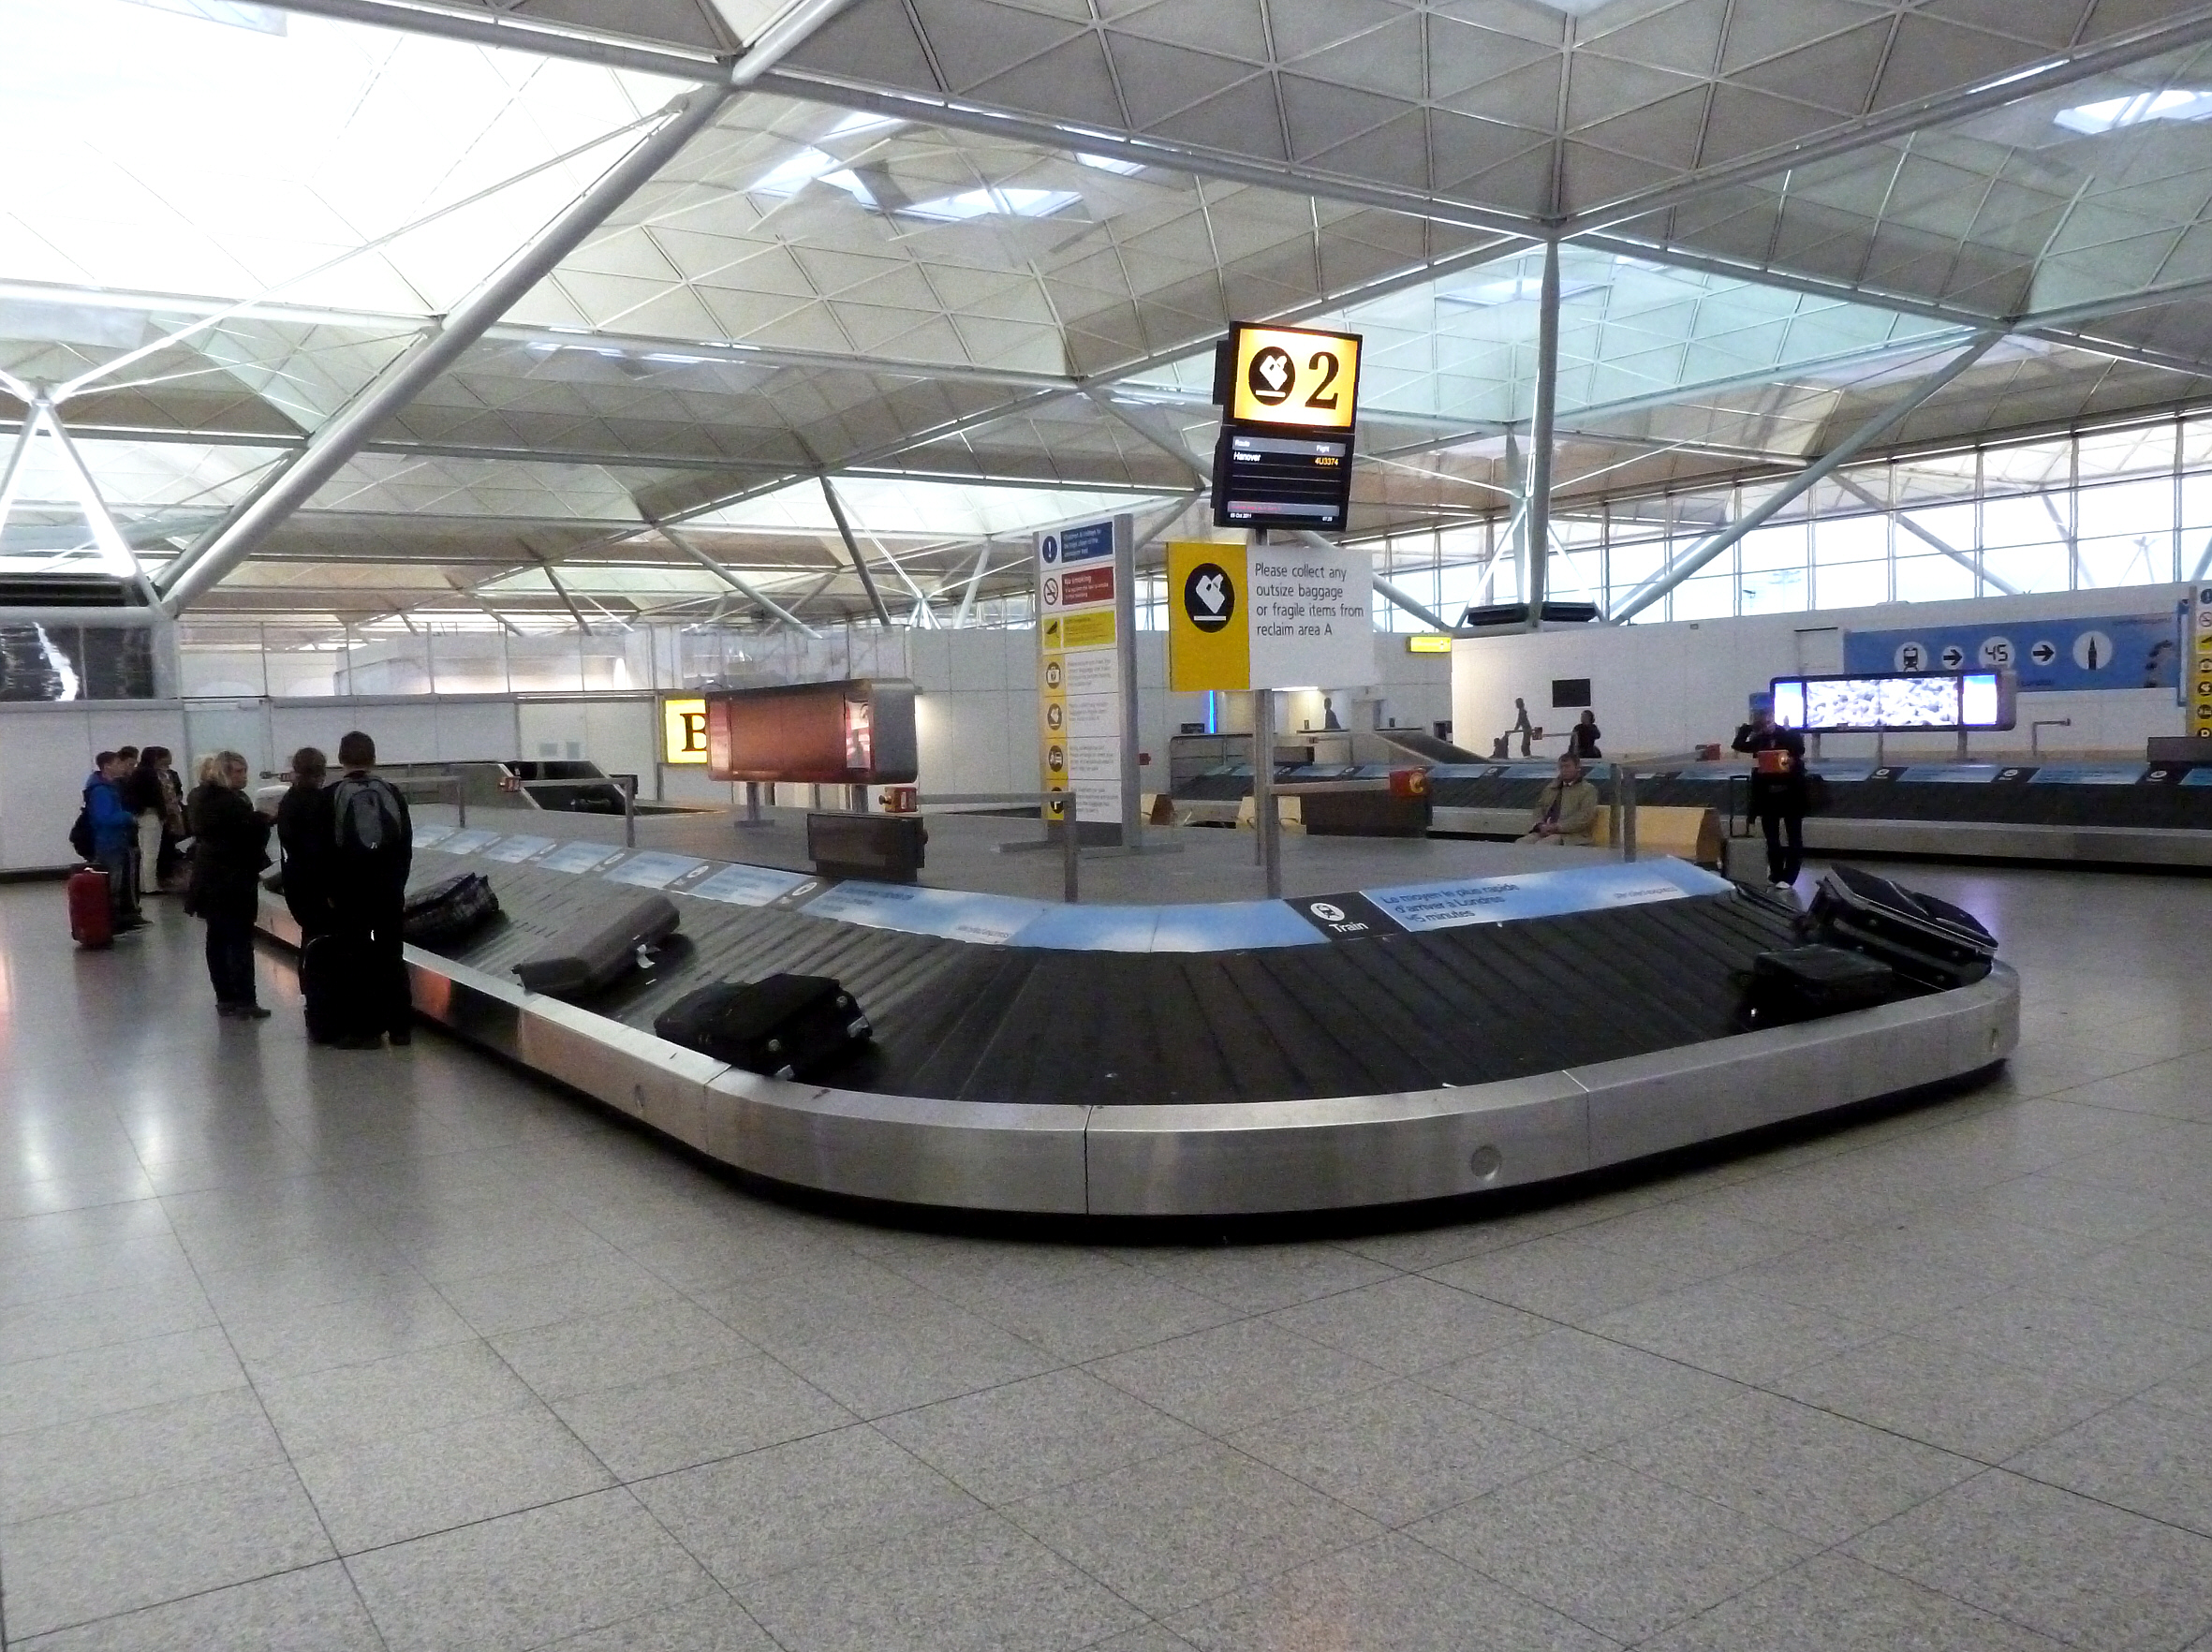 http://www.arlynscales.com/wp-content/uploads/2015/01/London_Stansted_Airport_-_Baggage_reclaim.jpg